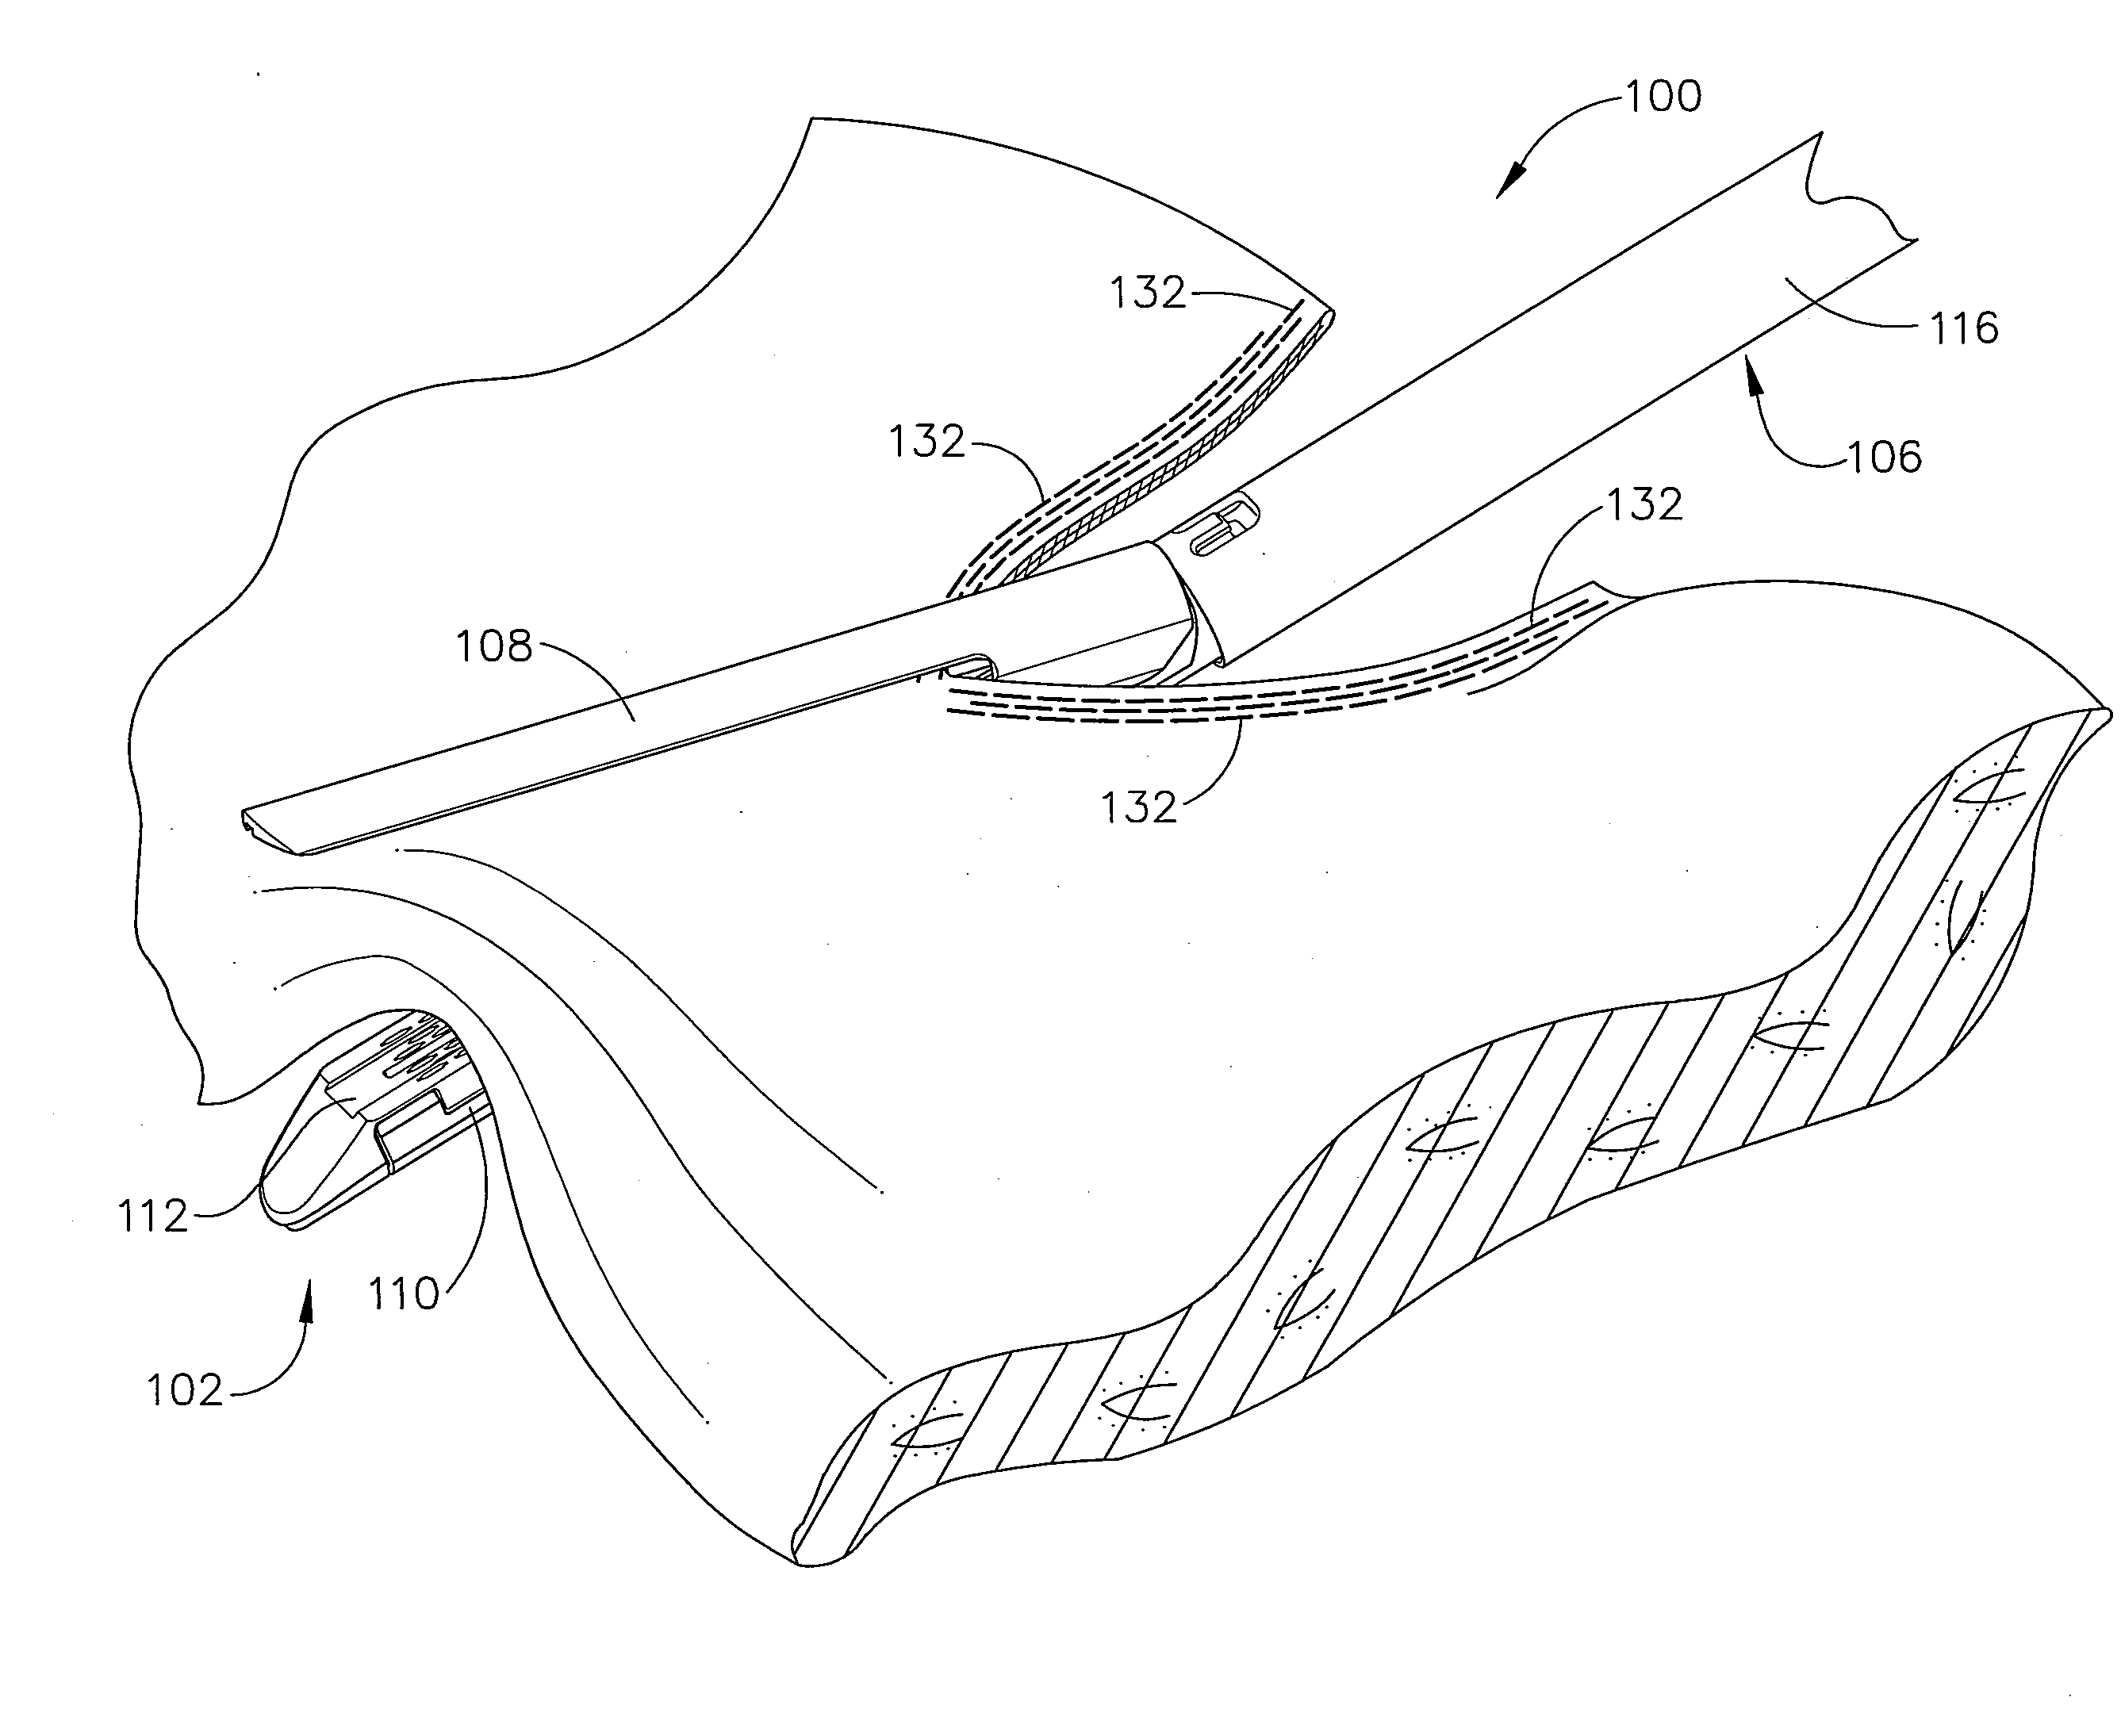 Surgical stapling device with a curved cutting member